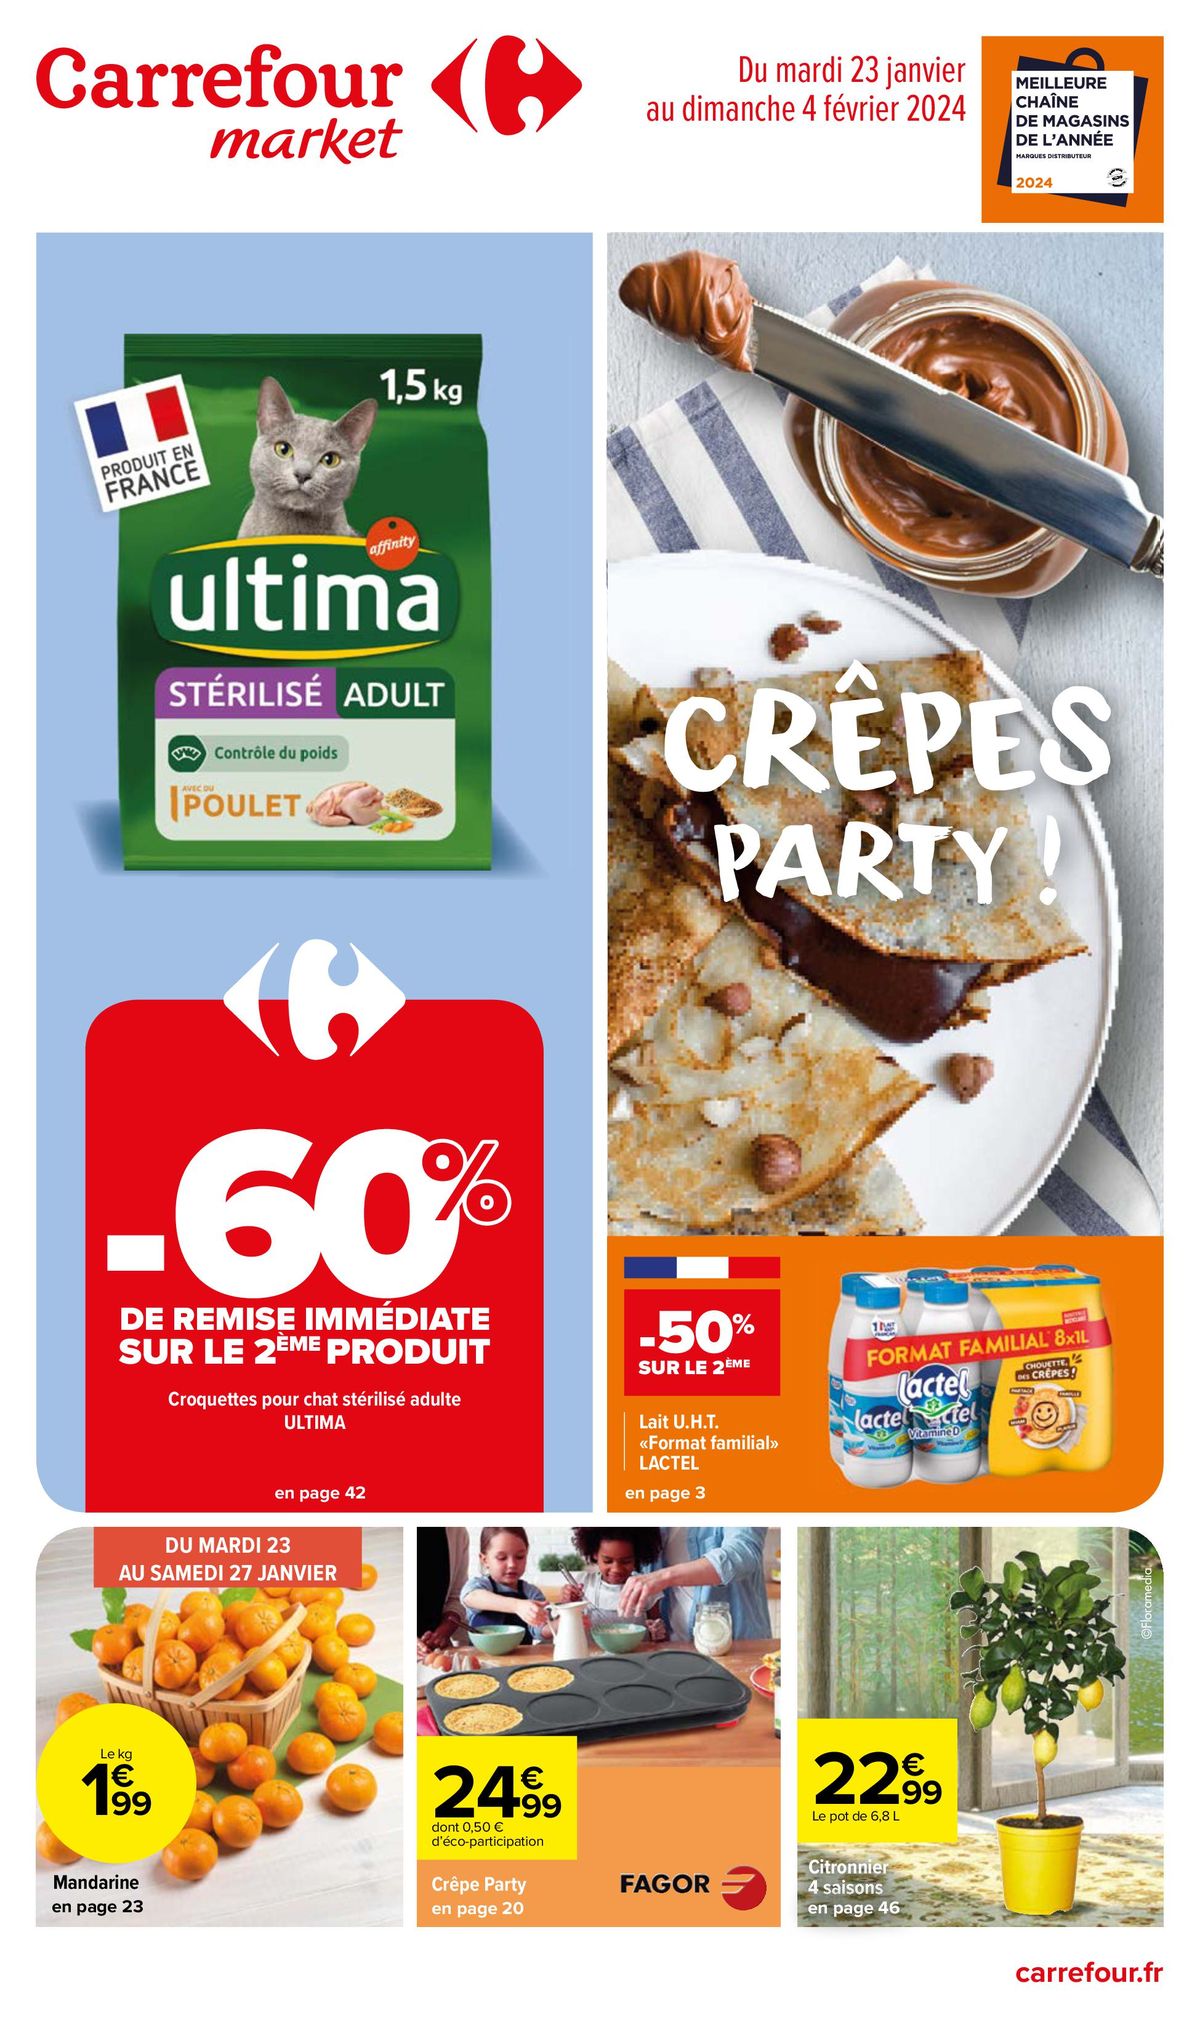 Catalogue Crêpes Party !, page 00001